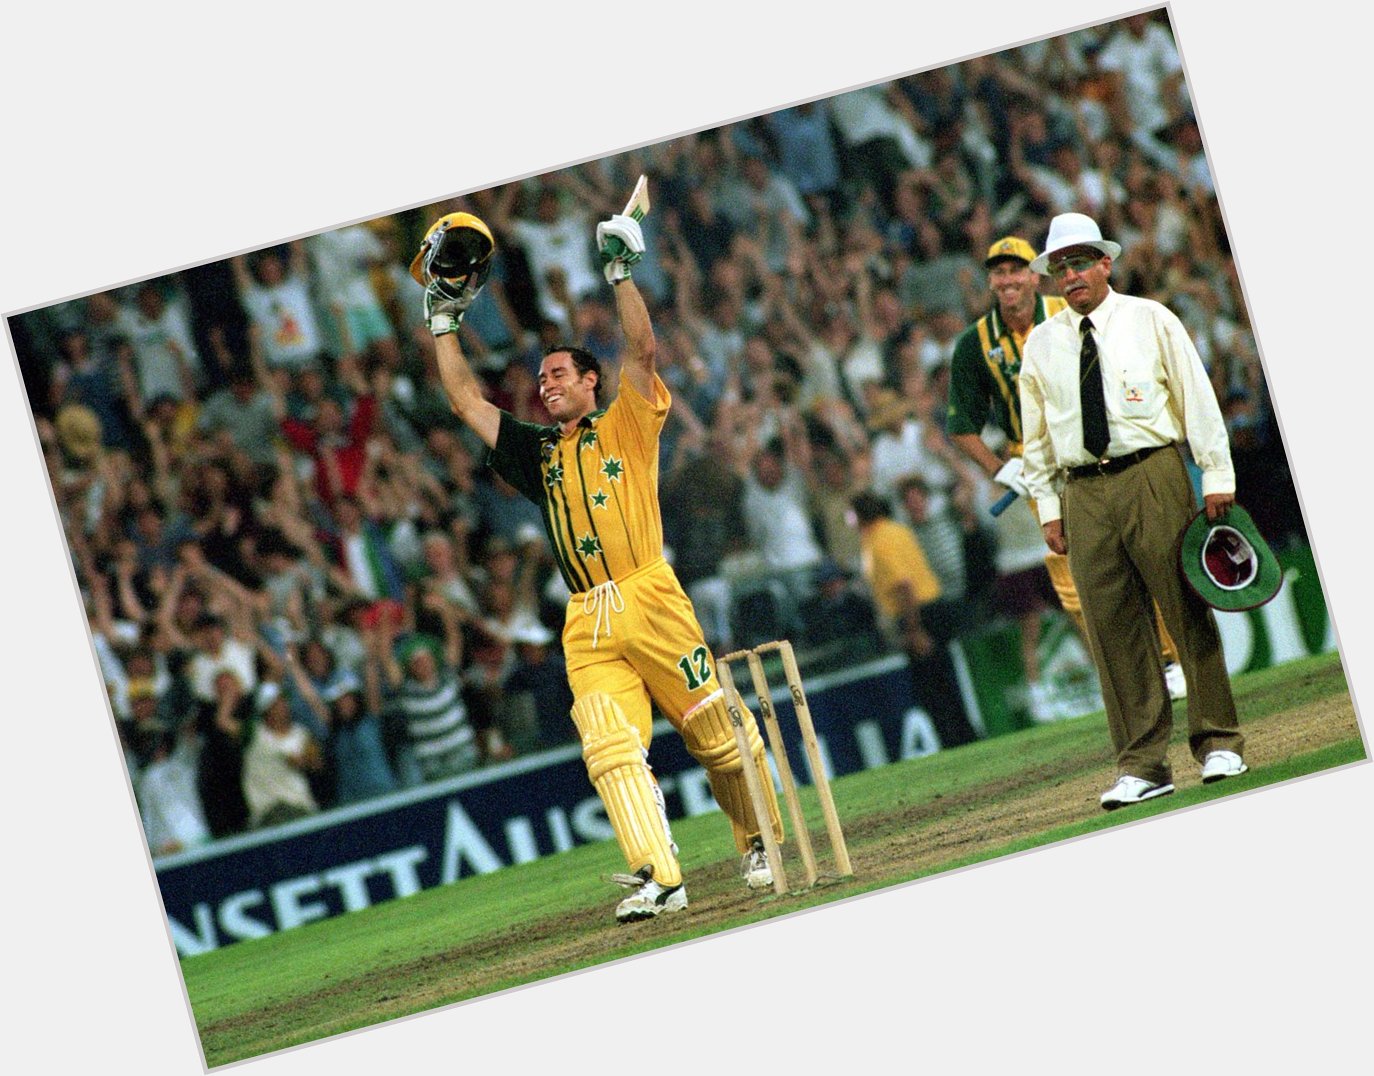 Happy birthday to Michael Bevan. One of the all-time great ODI cricketers! 